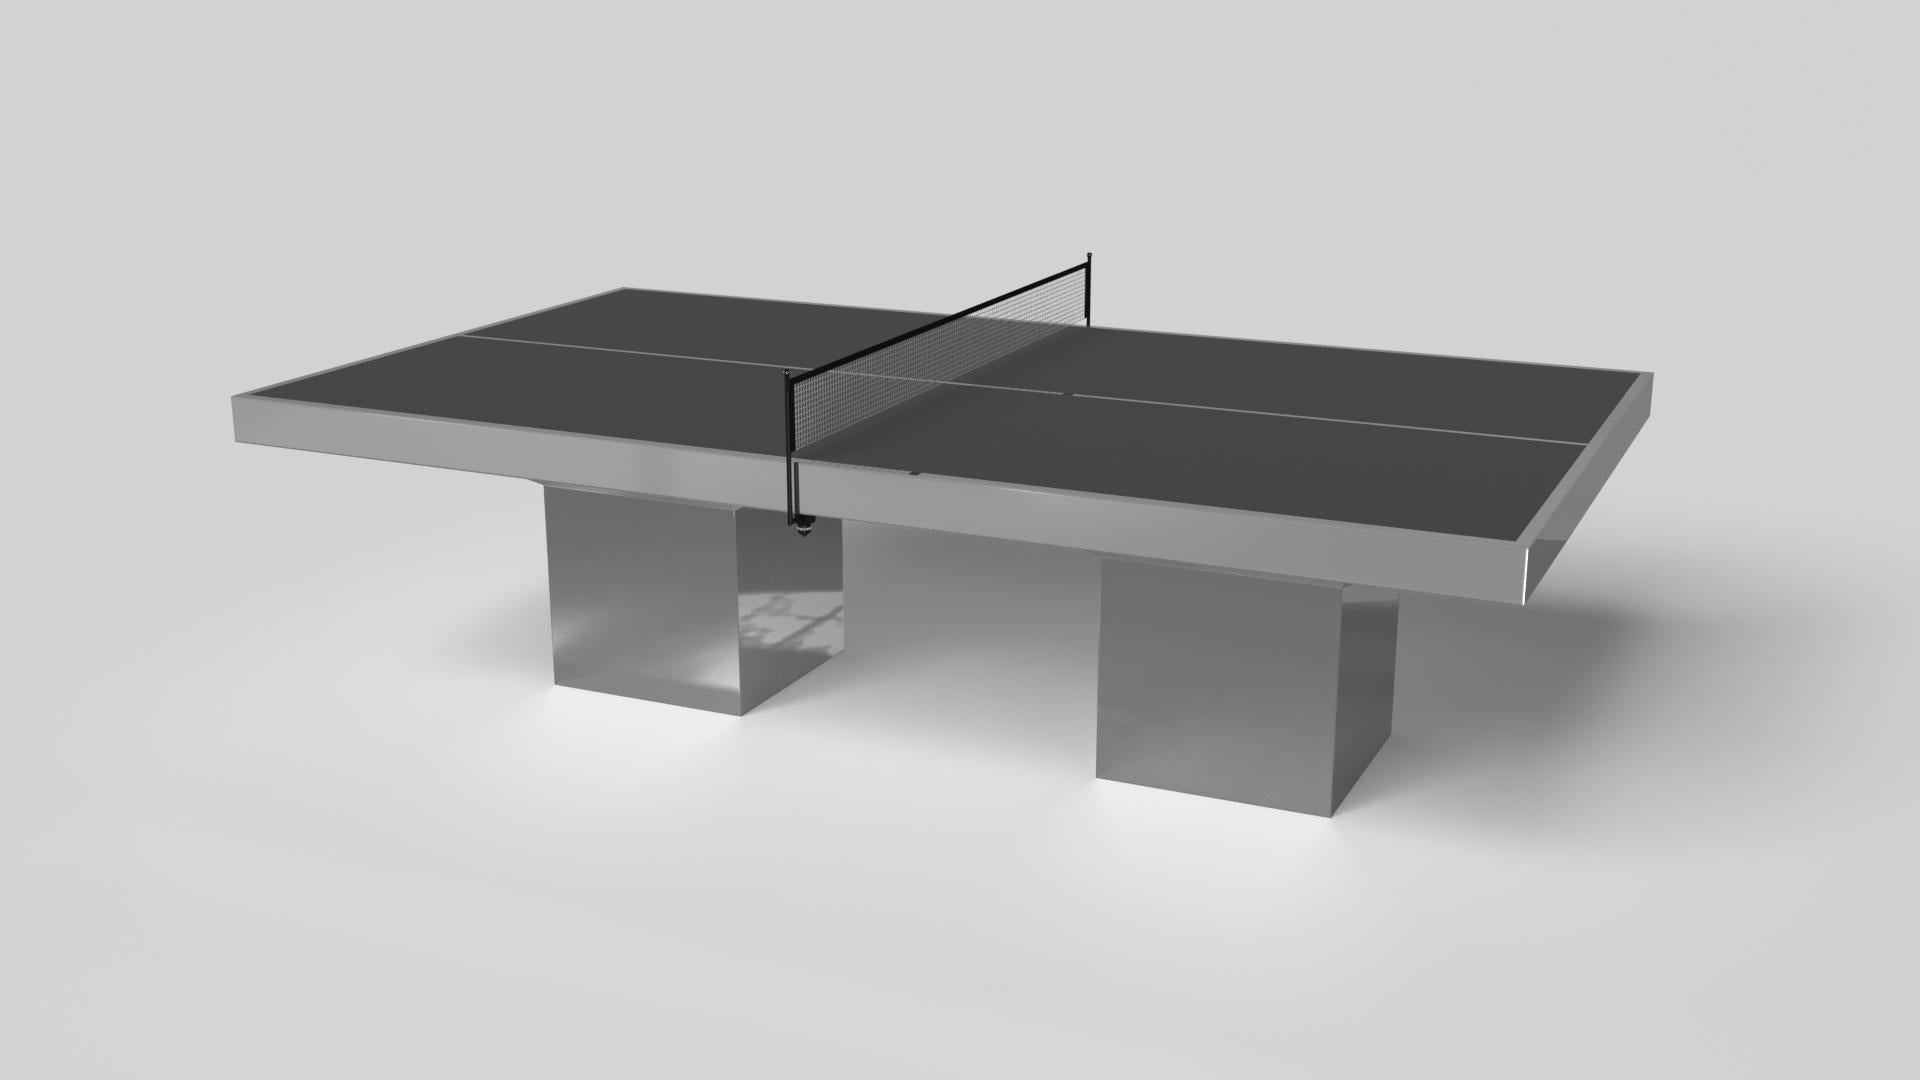 Minimalist design meets opulent elegance in the Trestle table tennis table. Detailed with a professional surface for endless game play, this contemporary table is expertly crafted. Square block legs give it a stark, geometric look that contributes